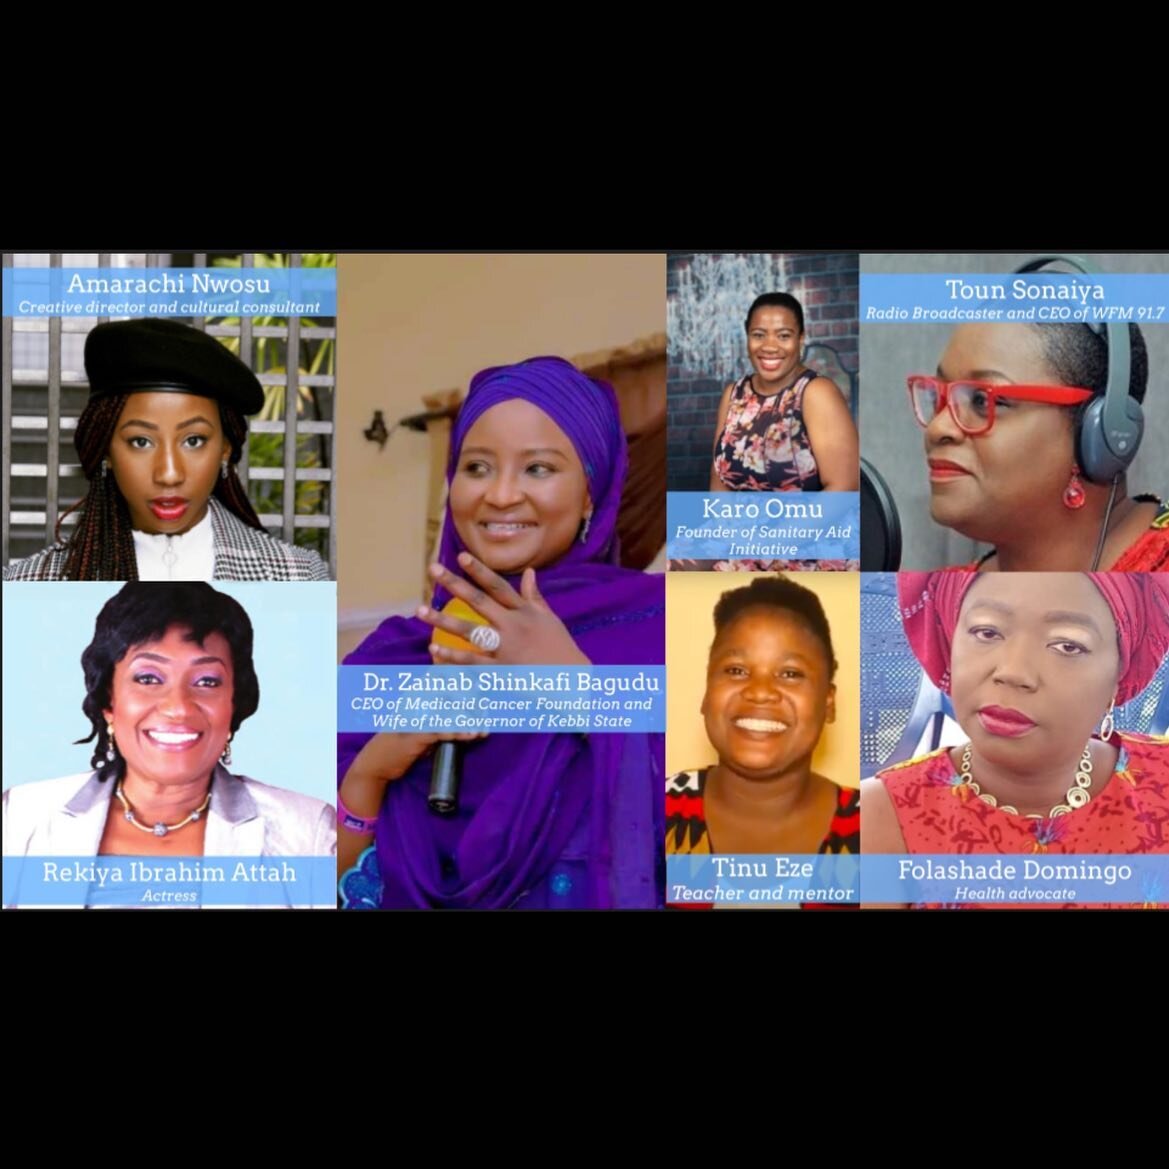 Happy International Women's Day! We're honored to have such strong women leaders serve as Ambassadors to the CCFN campaign, helping us to eliminate cervical cancer from Nigeria. Let's all take today to appreciate all the women in our lives whether th